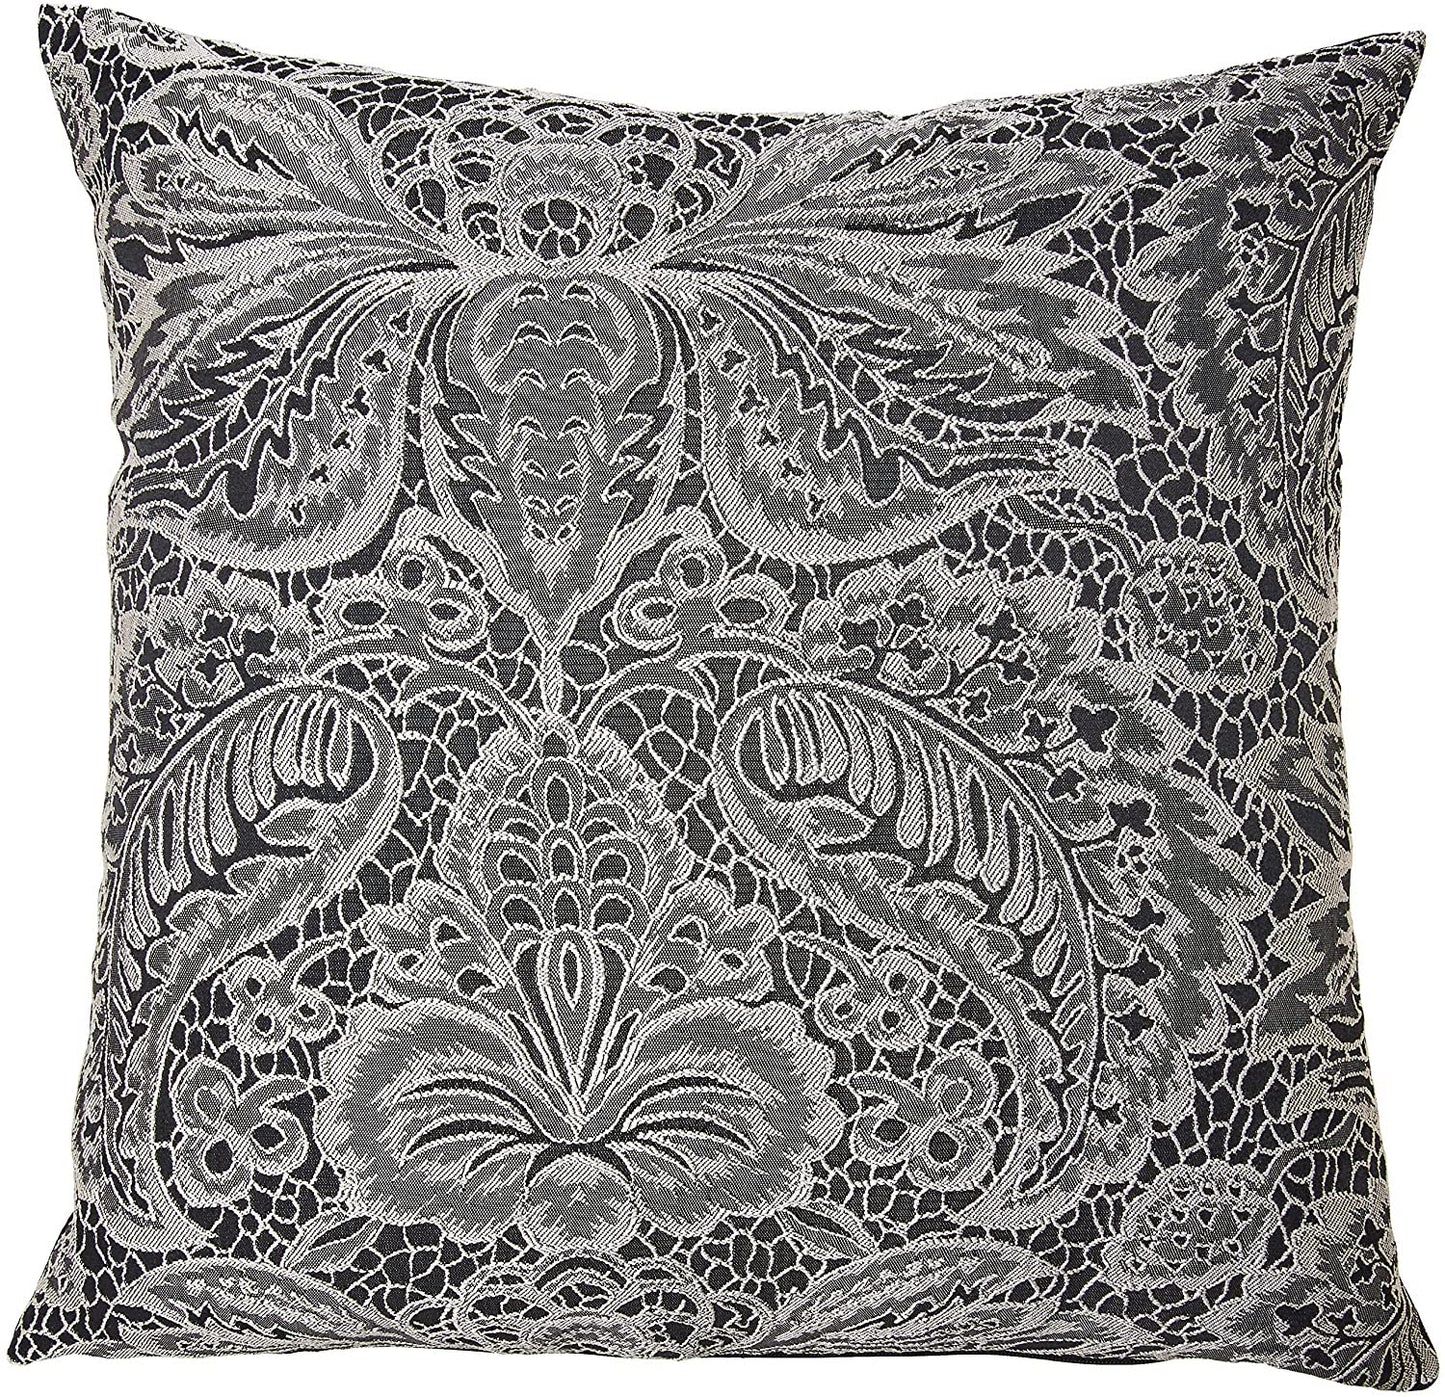 Pacifica Lace Look Damask Pattern Decorative Throw Pillow Cover